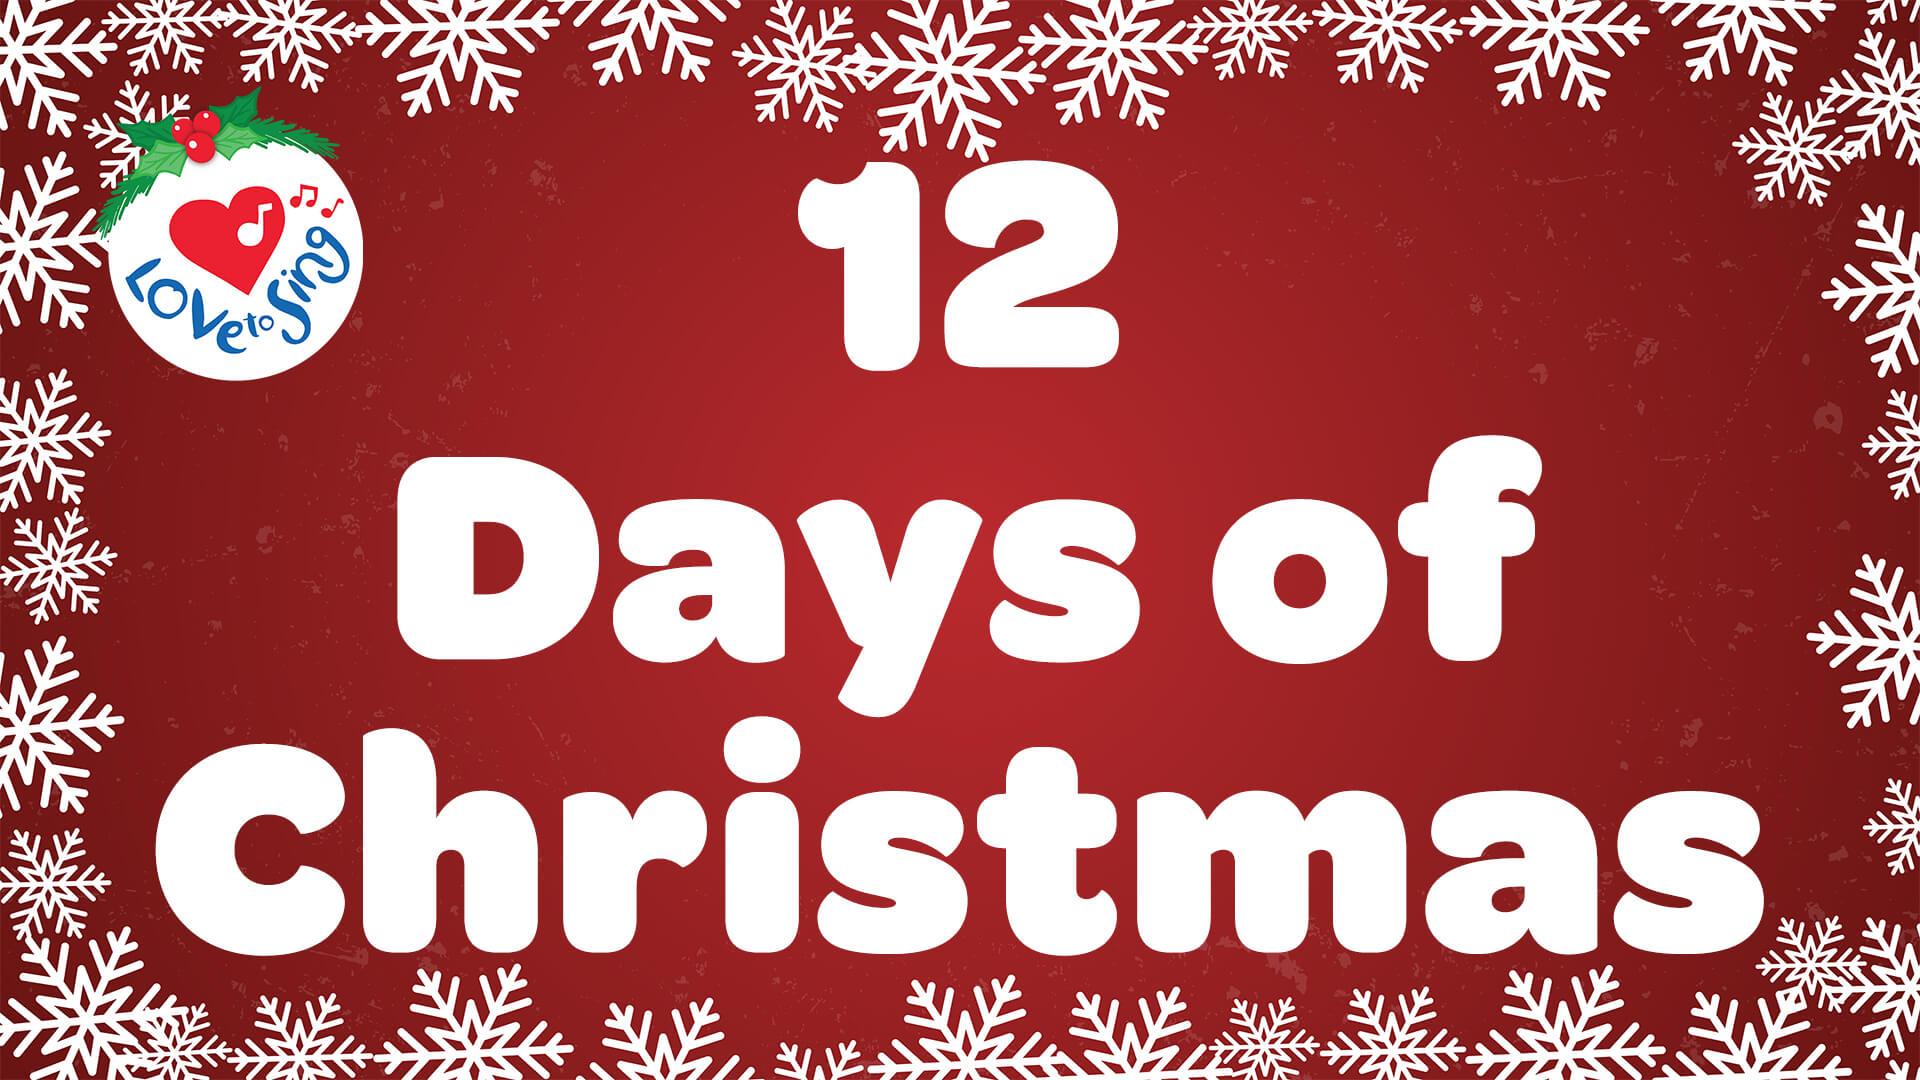 Days of Christmas Lyric Video Song Download. Love to Sing